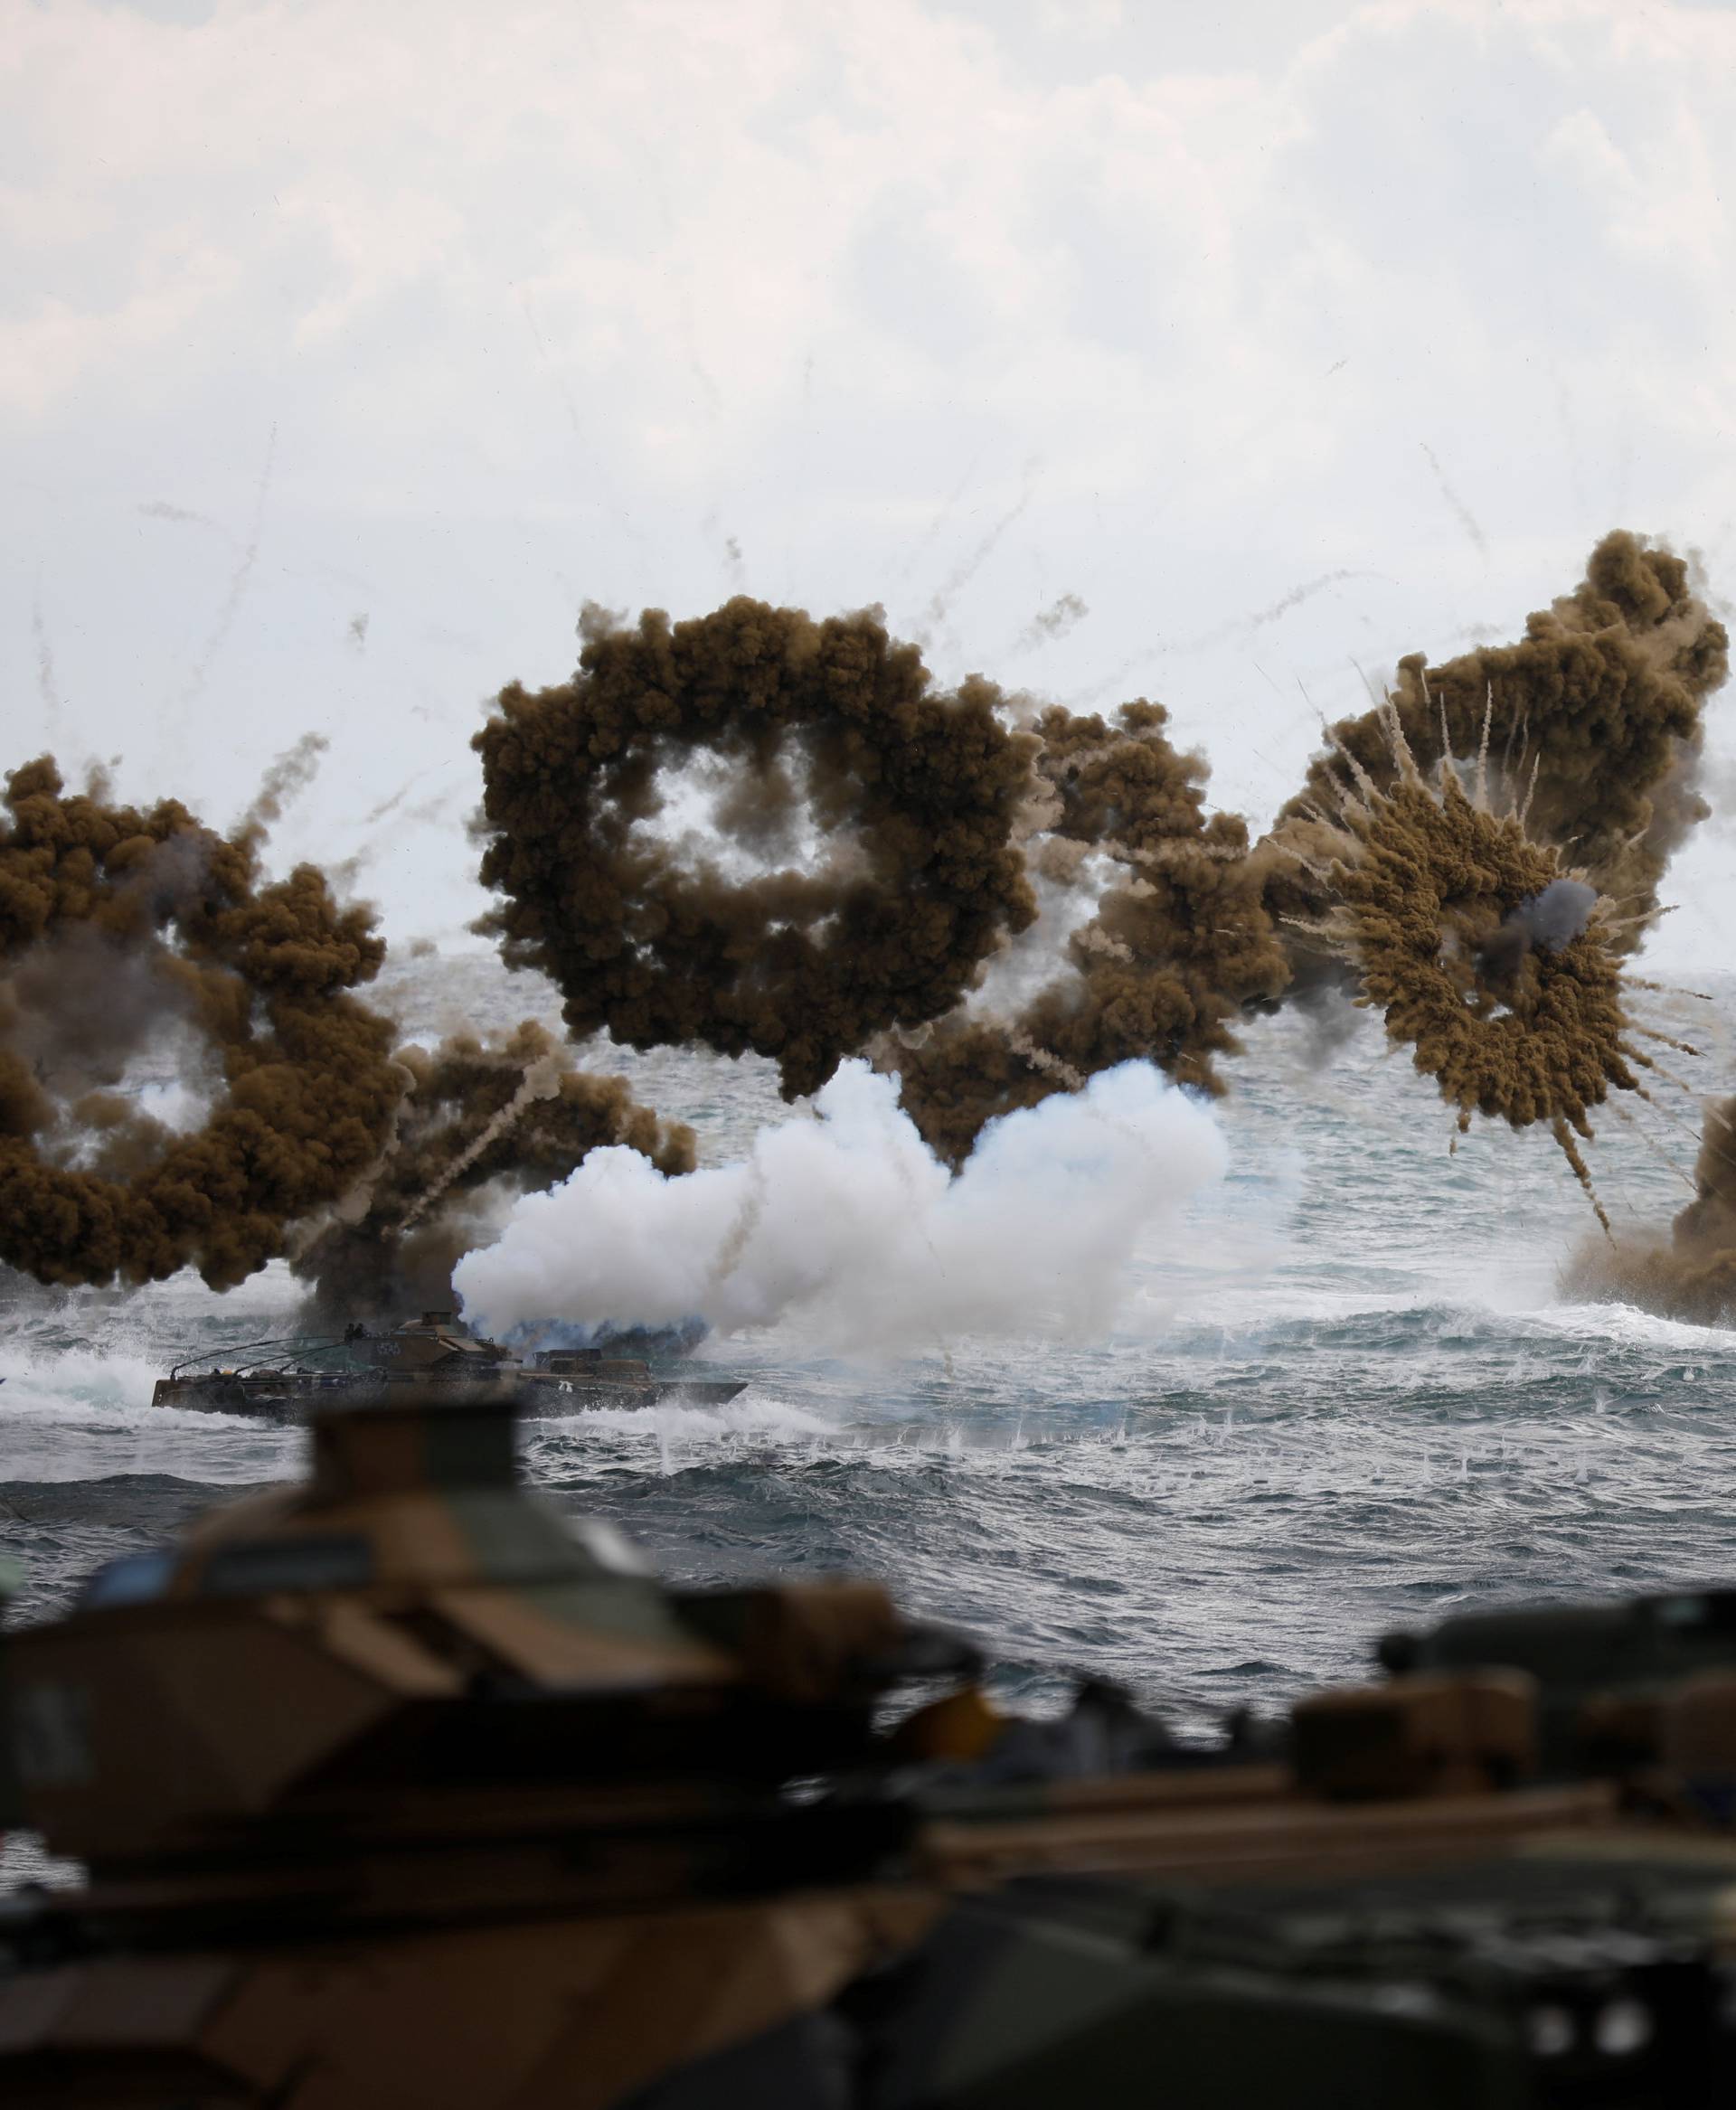 Amphibious assault vehicles of the South Korean Marine Corps fire smoke bombs as they move to land on the shore during a U.S.-South Korea joint landing operation drill as a part of the two countries' annual military training called Foal Eagle, in Pohang